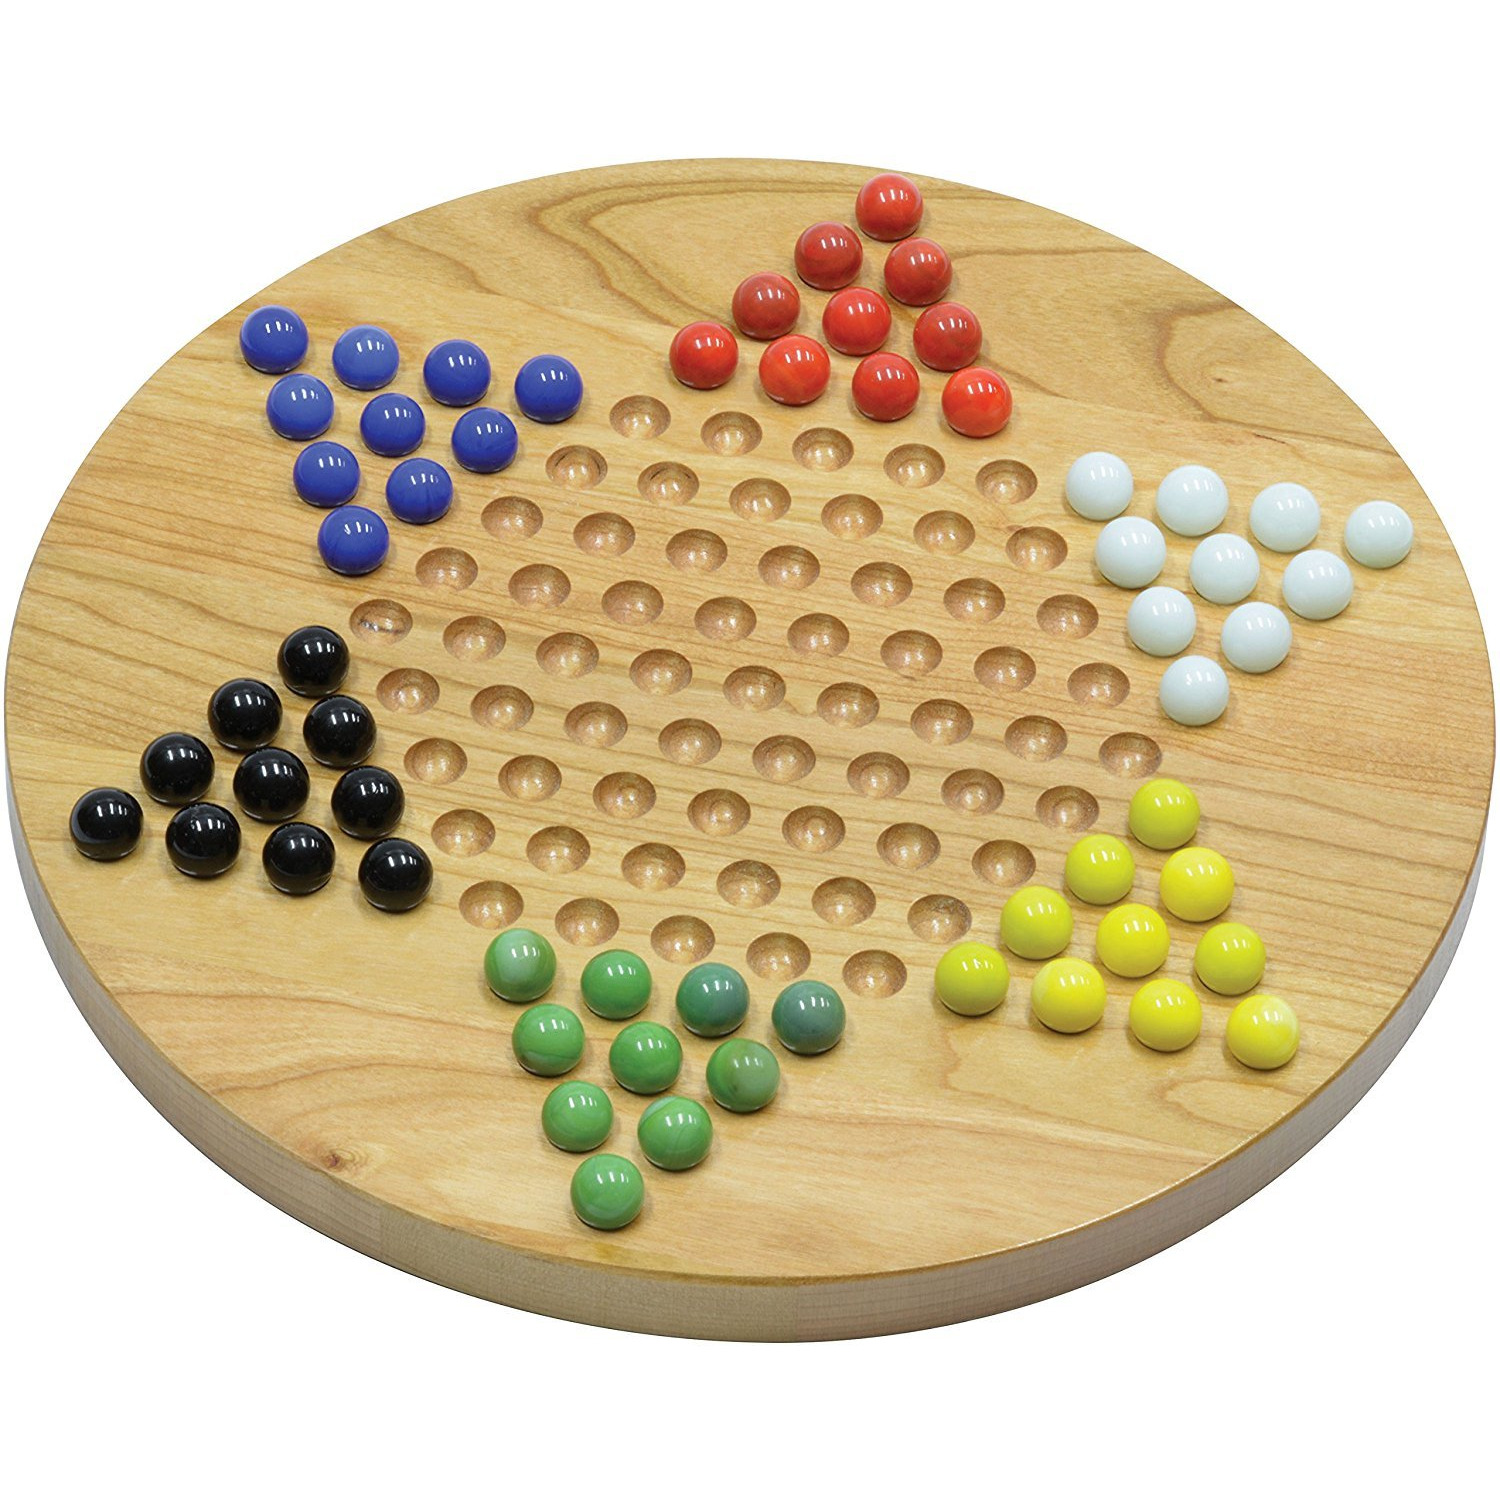 chinese checkers game with glass marbles